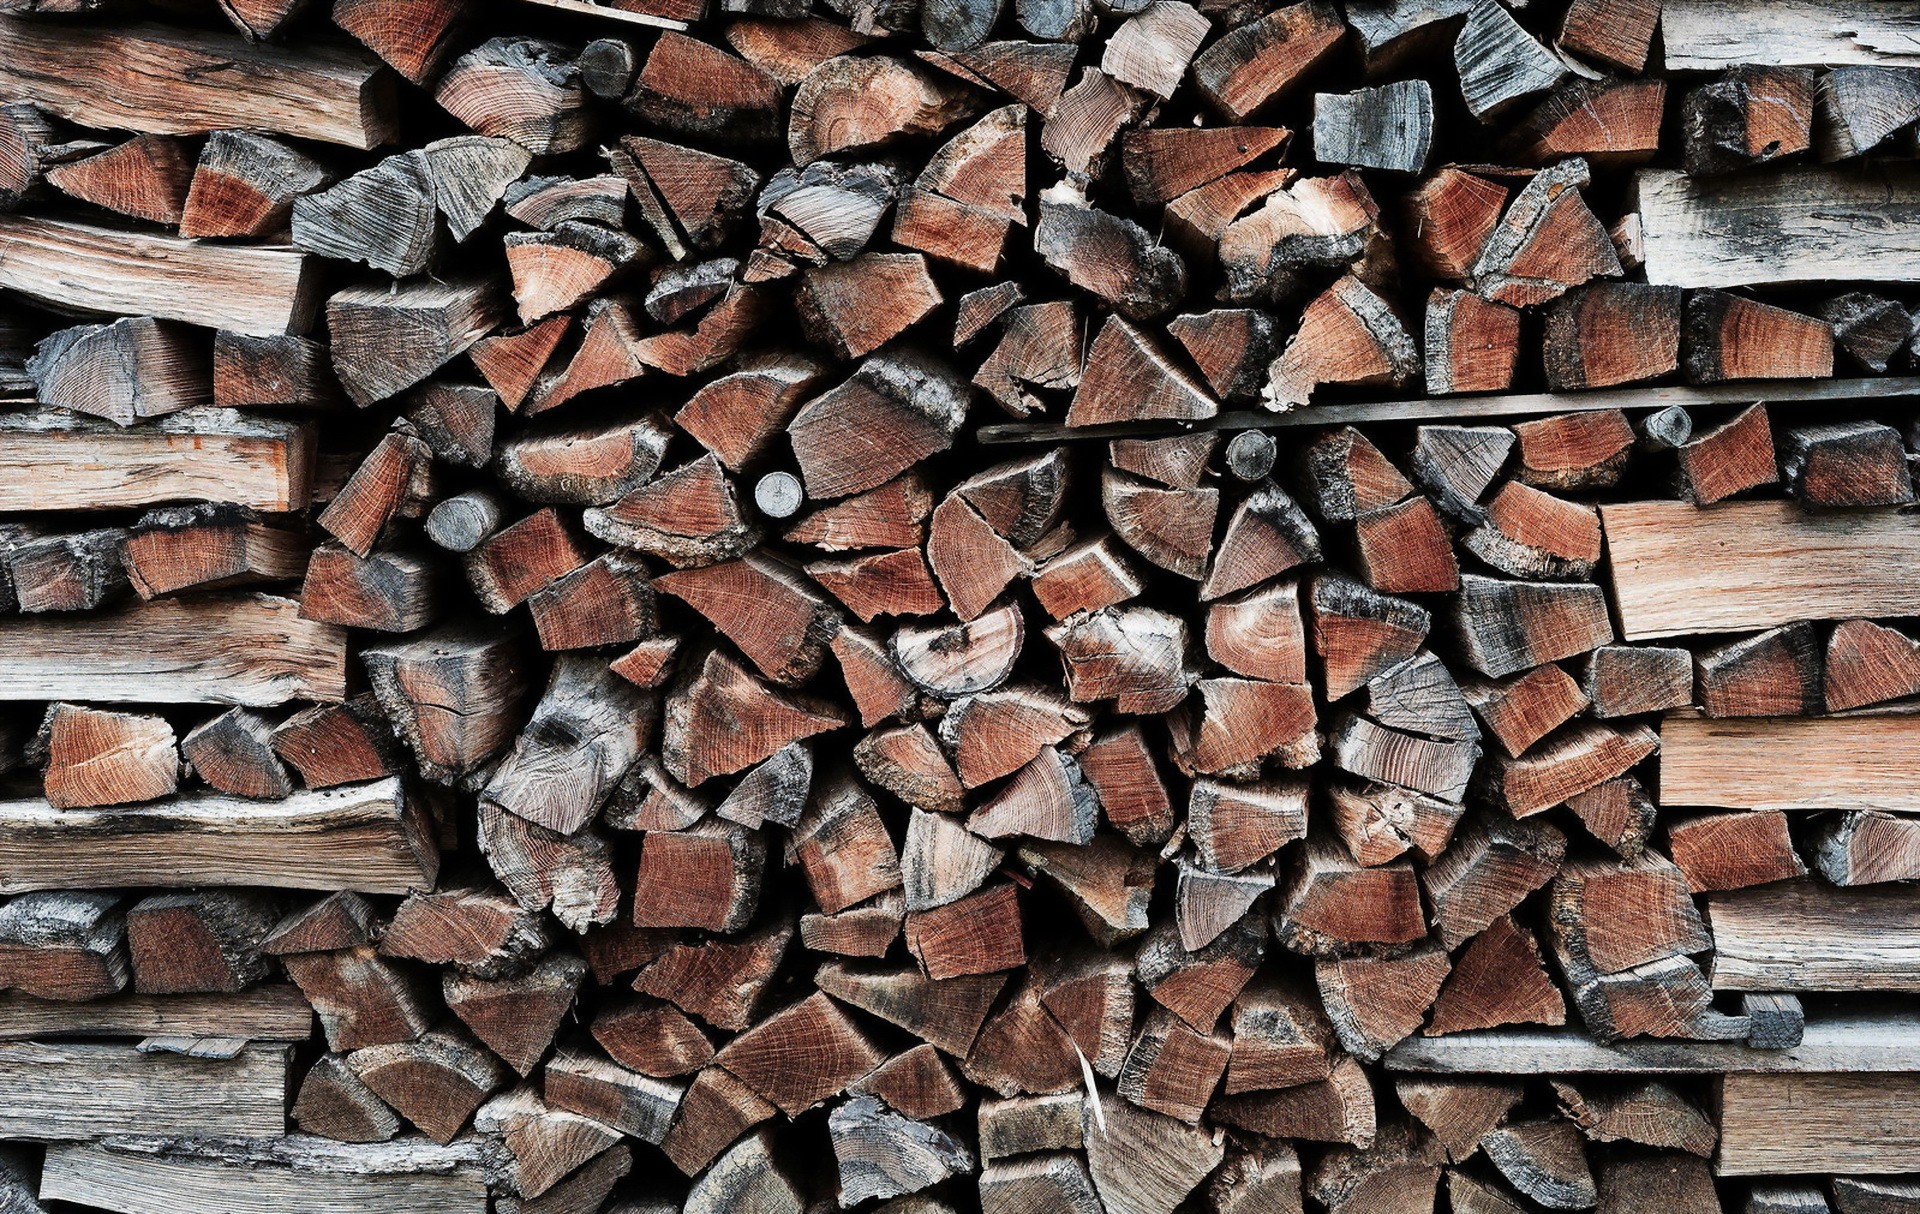 HD desktop wallpaper featuring a stack of chopped wood logs with a textured appearance.